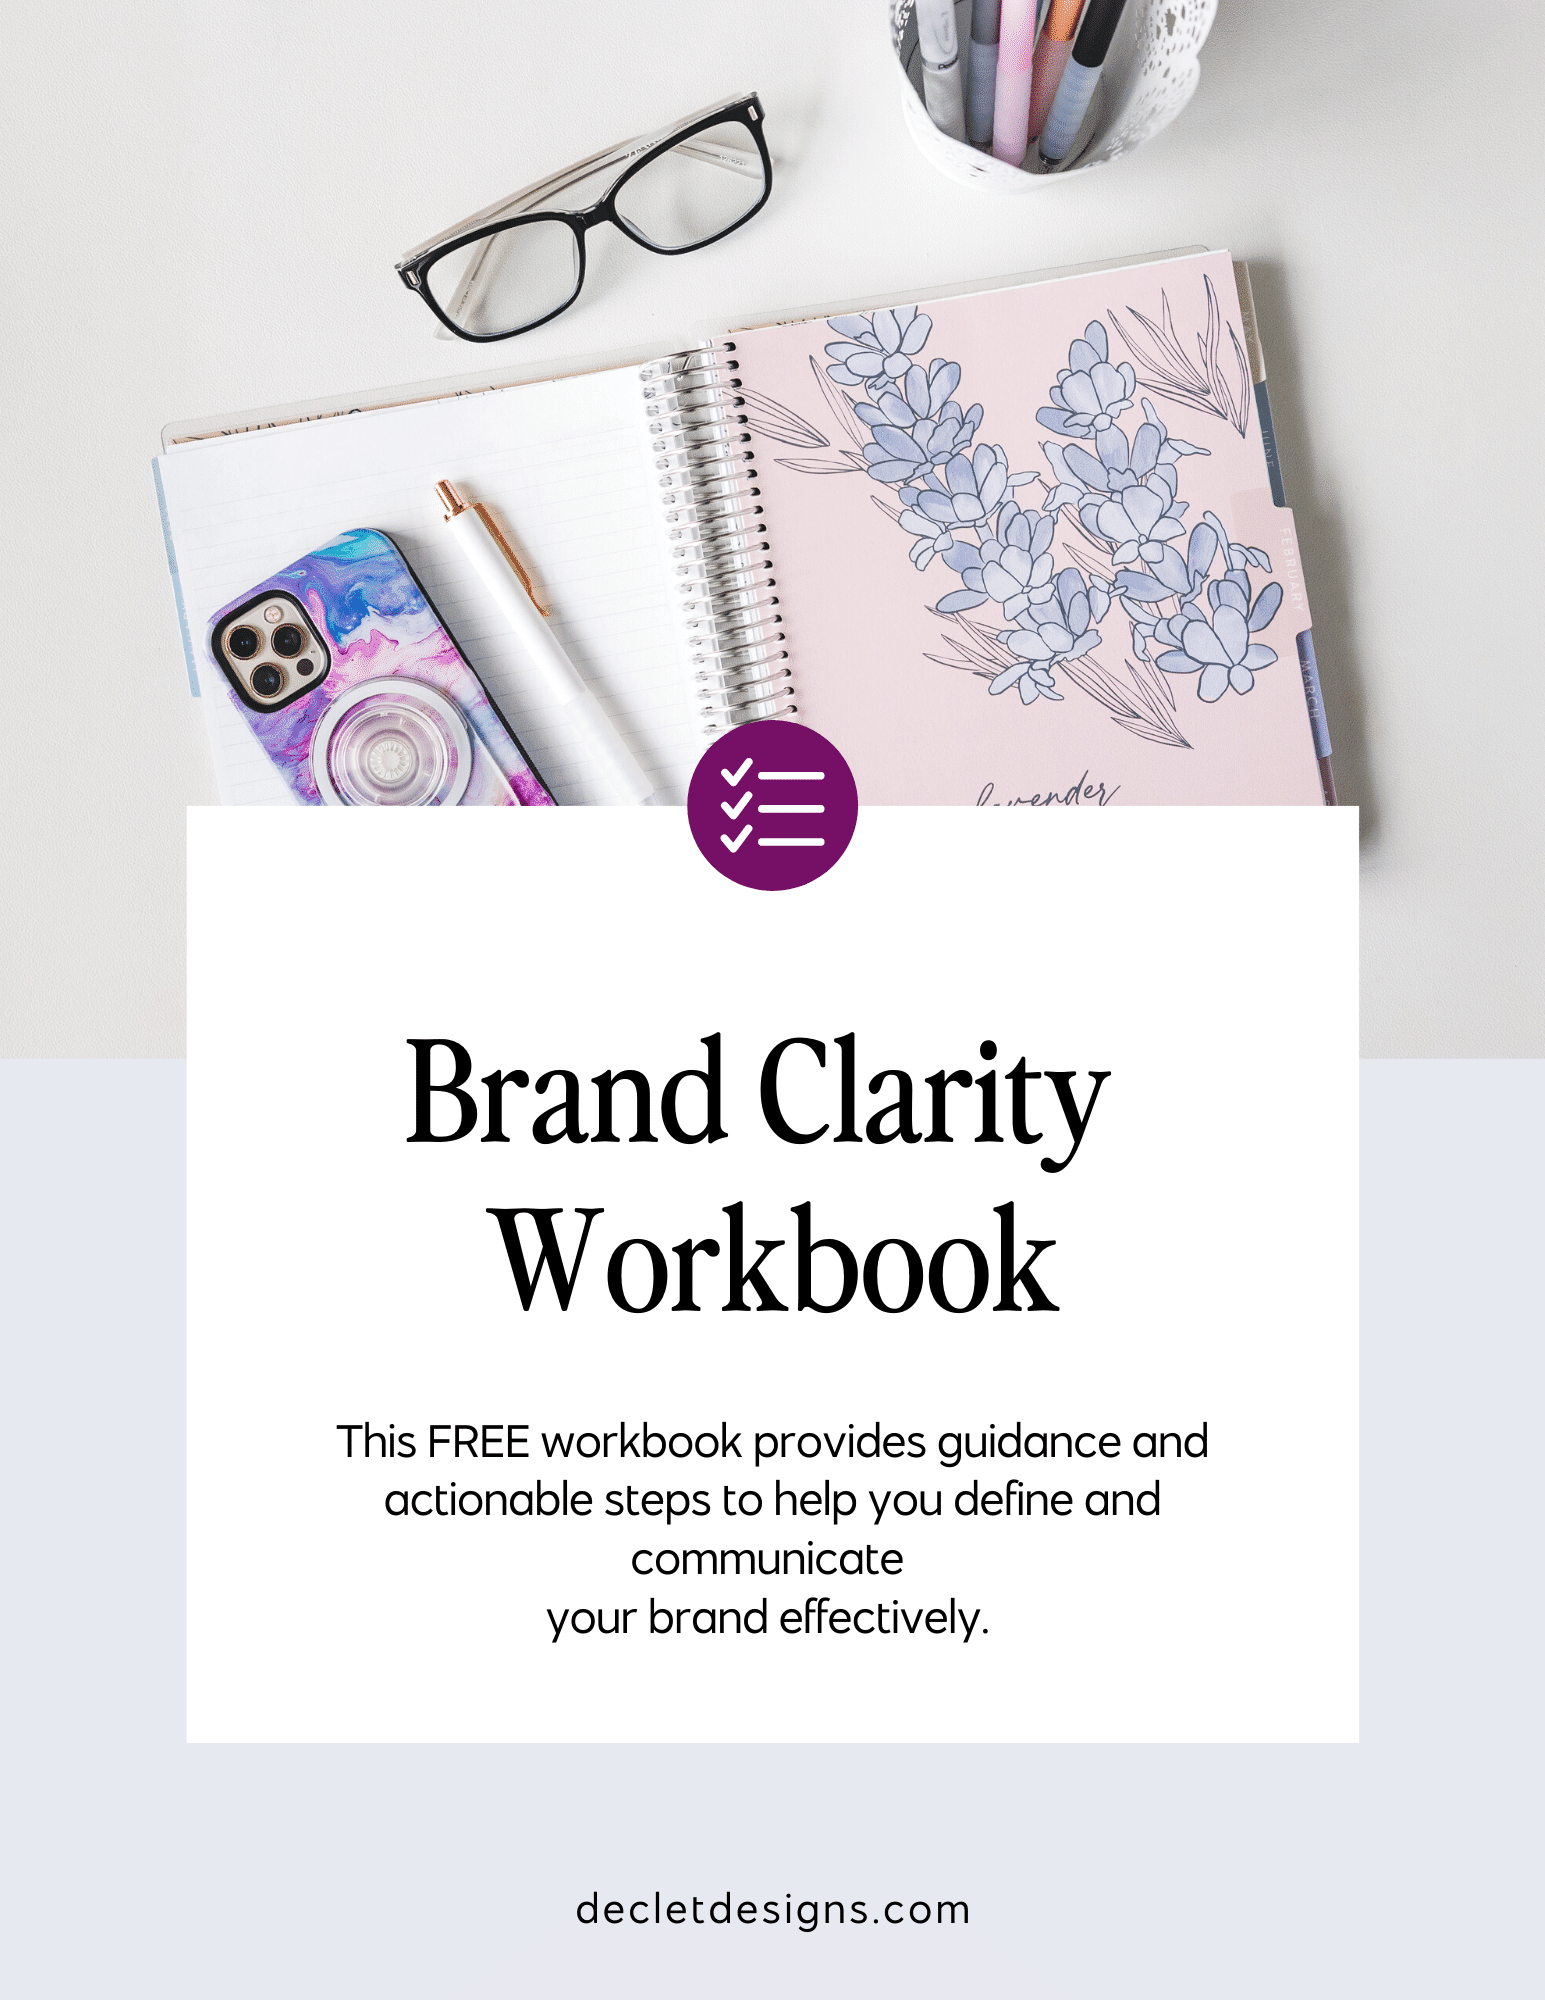 Brand clarity workbook for private practice dietitian